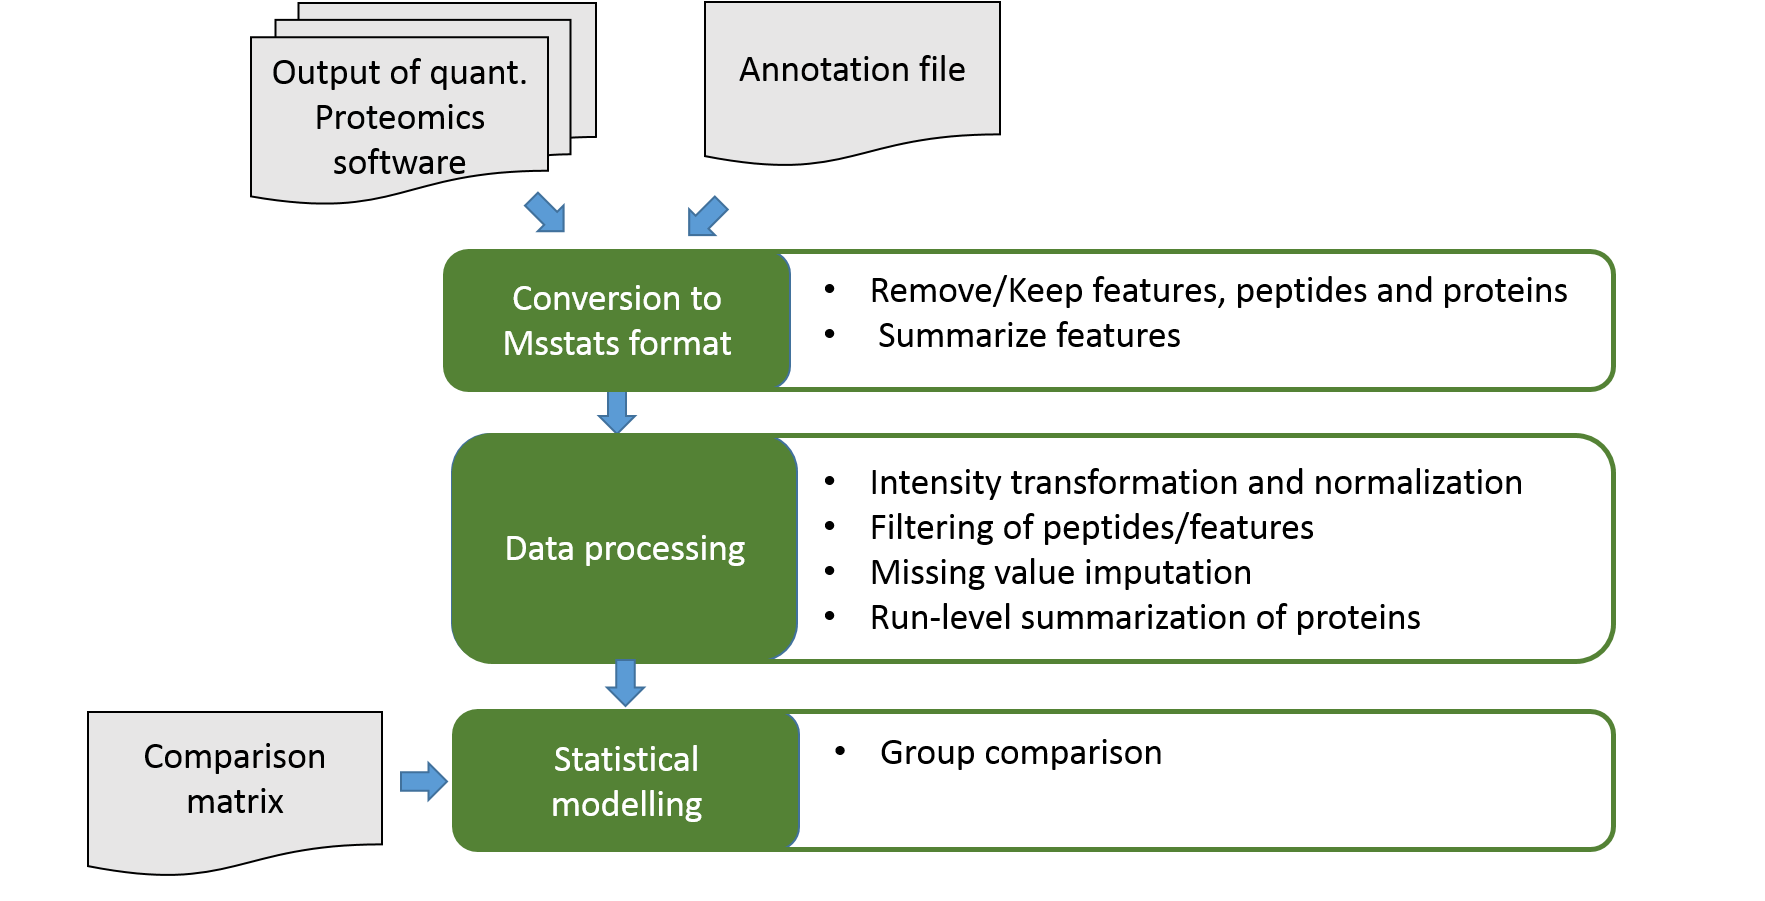 msstats takes output of quant. proteomics software and annotation files and converts them to msstats format. Removes/keeps features, peptides, and proteins and summarizes. This is passed to 'data processing' which has intensity transformation/normalisation, filtering of peptides/features, missing value imputation, and run level summarisation. This is passed to statistical modelling along with a comparison matrix and does group comparison.